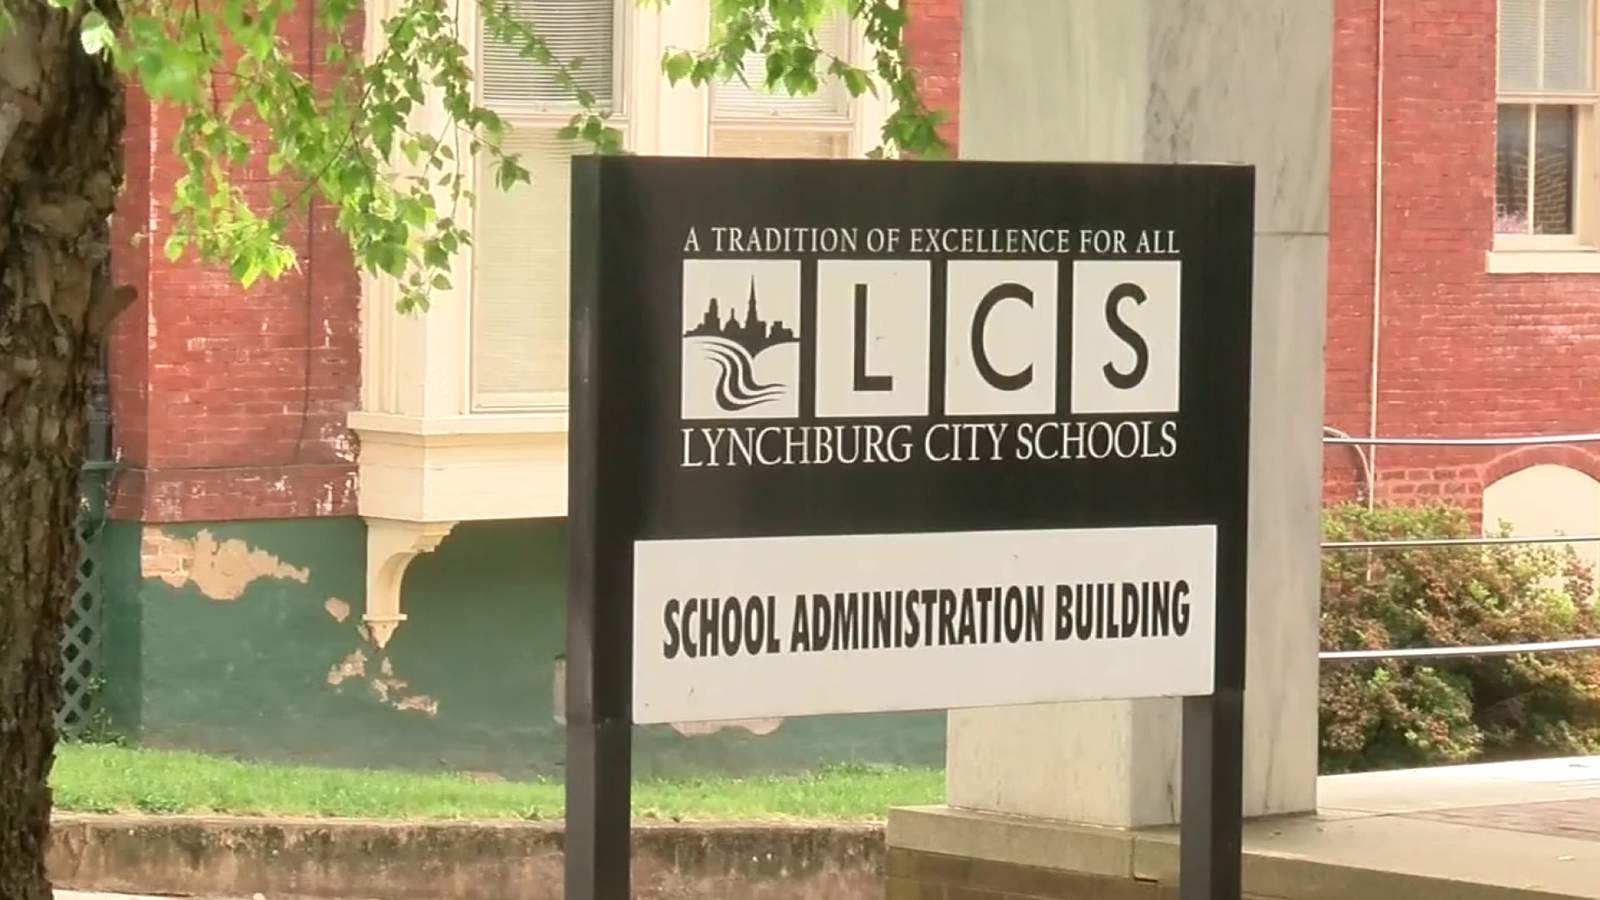 About 240 students return for in-person learning in Lynchburg